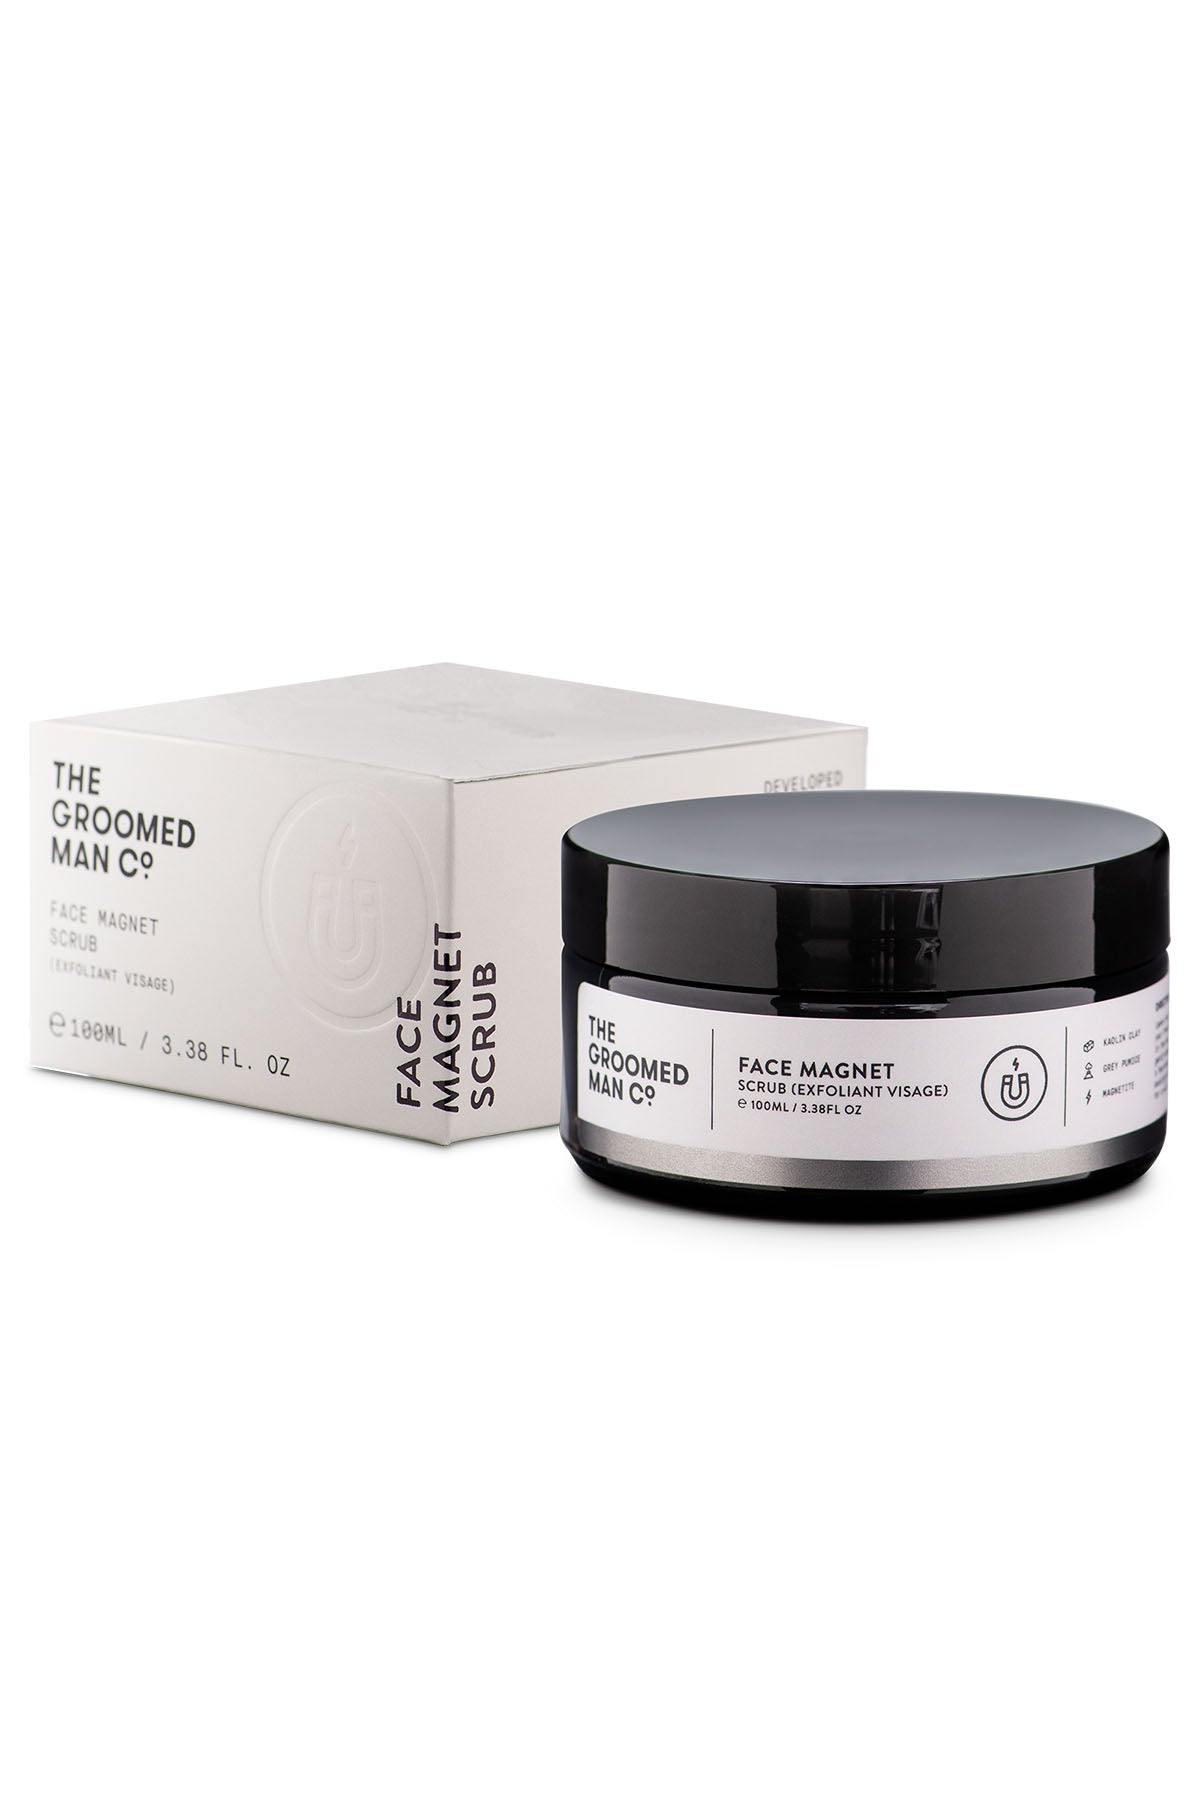 The Groomed Man Co. Face Magnet Premium Face Scrub